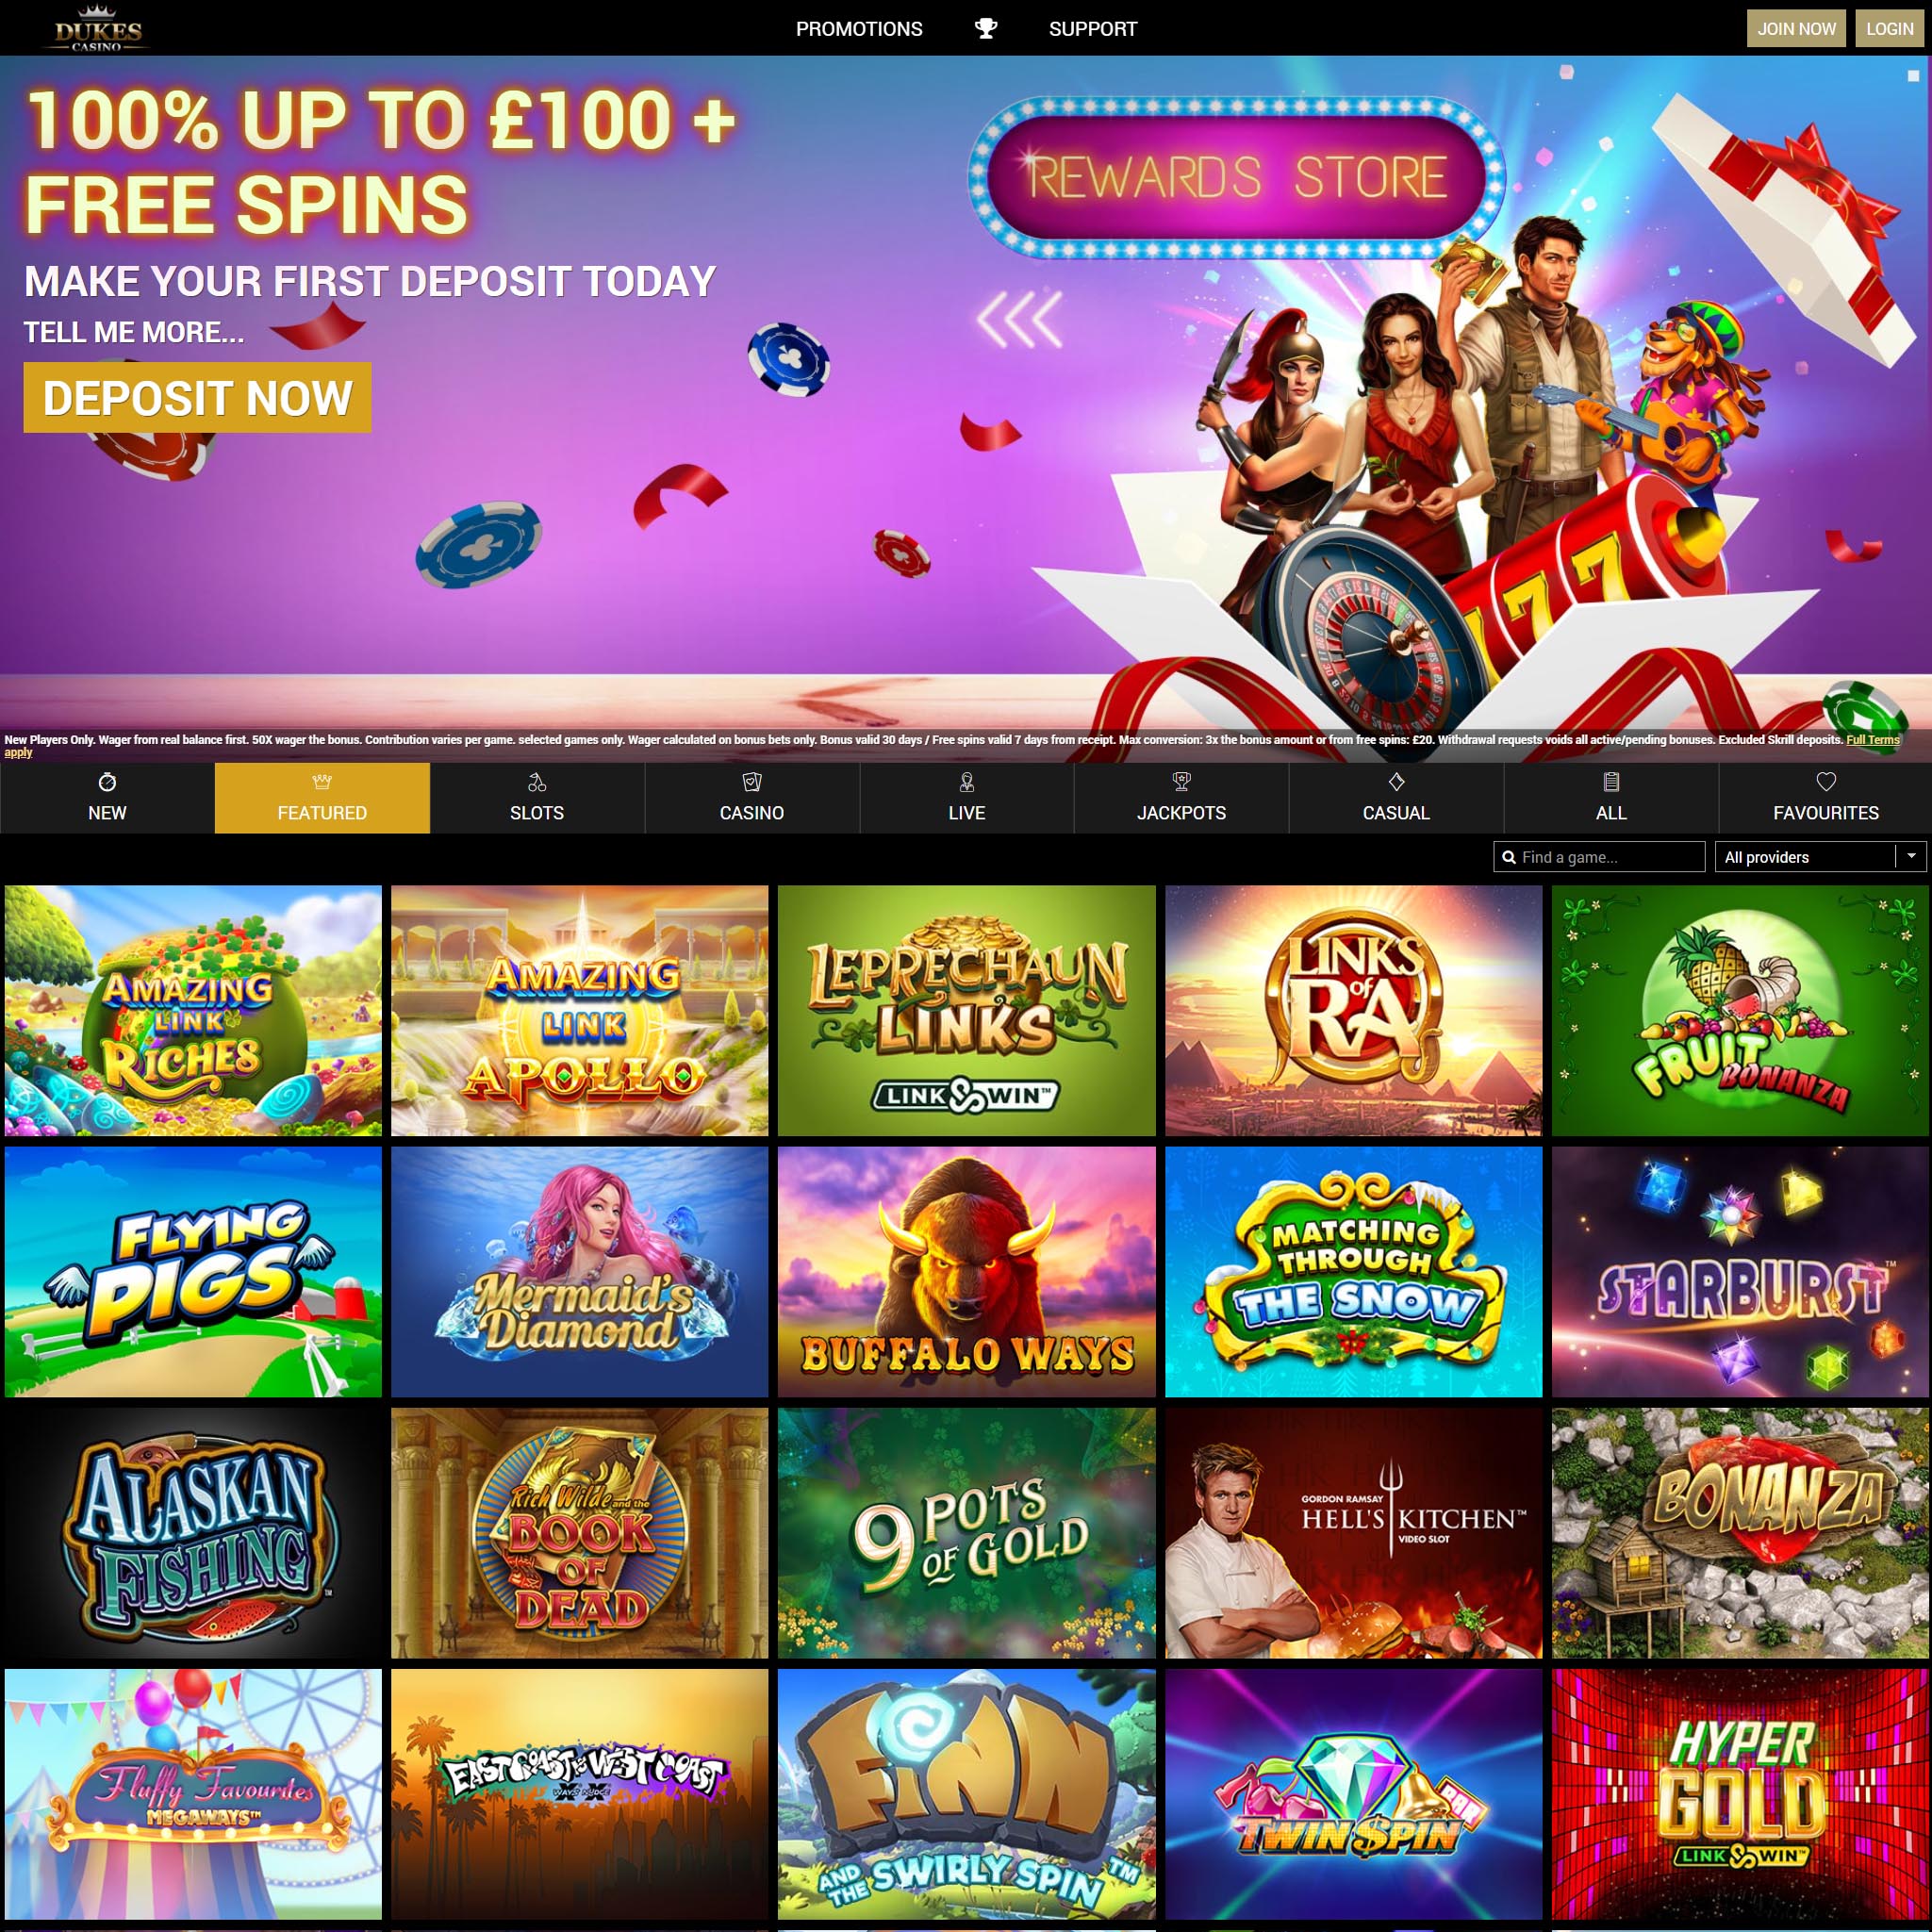 Dukes Casino review, bonus, free spins, and real player reviews